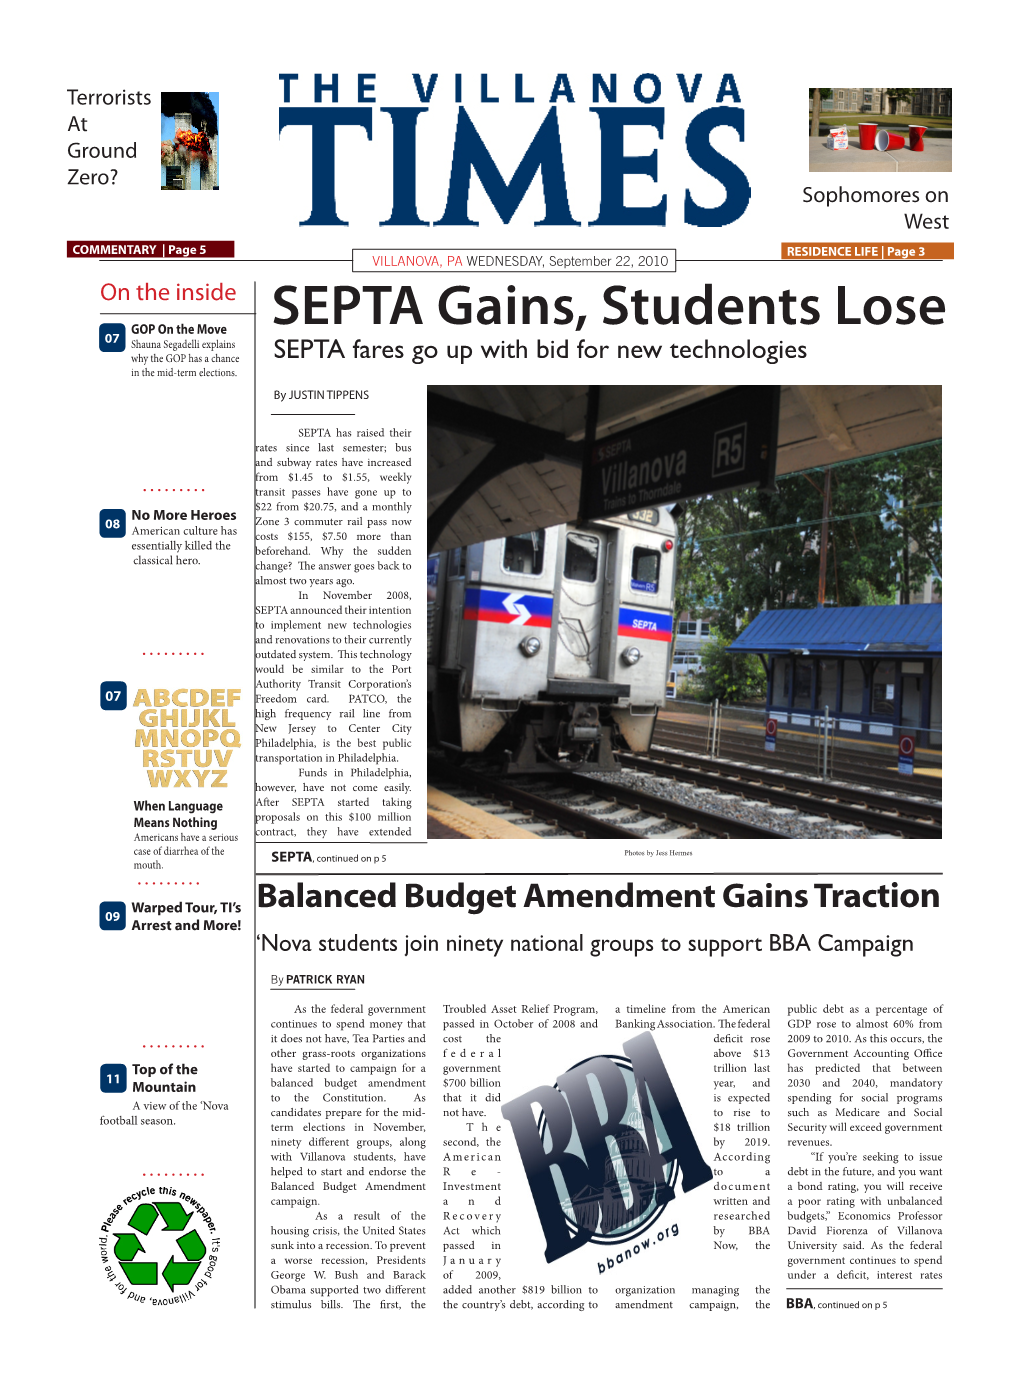 SEPTA Gains, Students Lose 07 Shauna Segadelli Explains Why the GOP Has a Chance SEPTA Fares Go up with Bid for New Technologies in the Mid-Term Elections